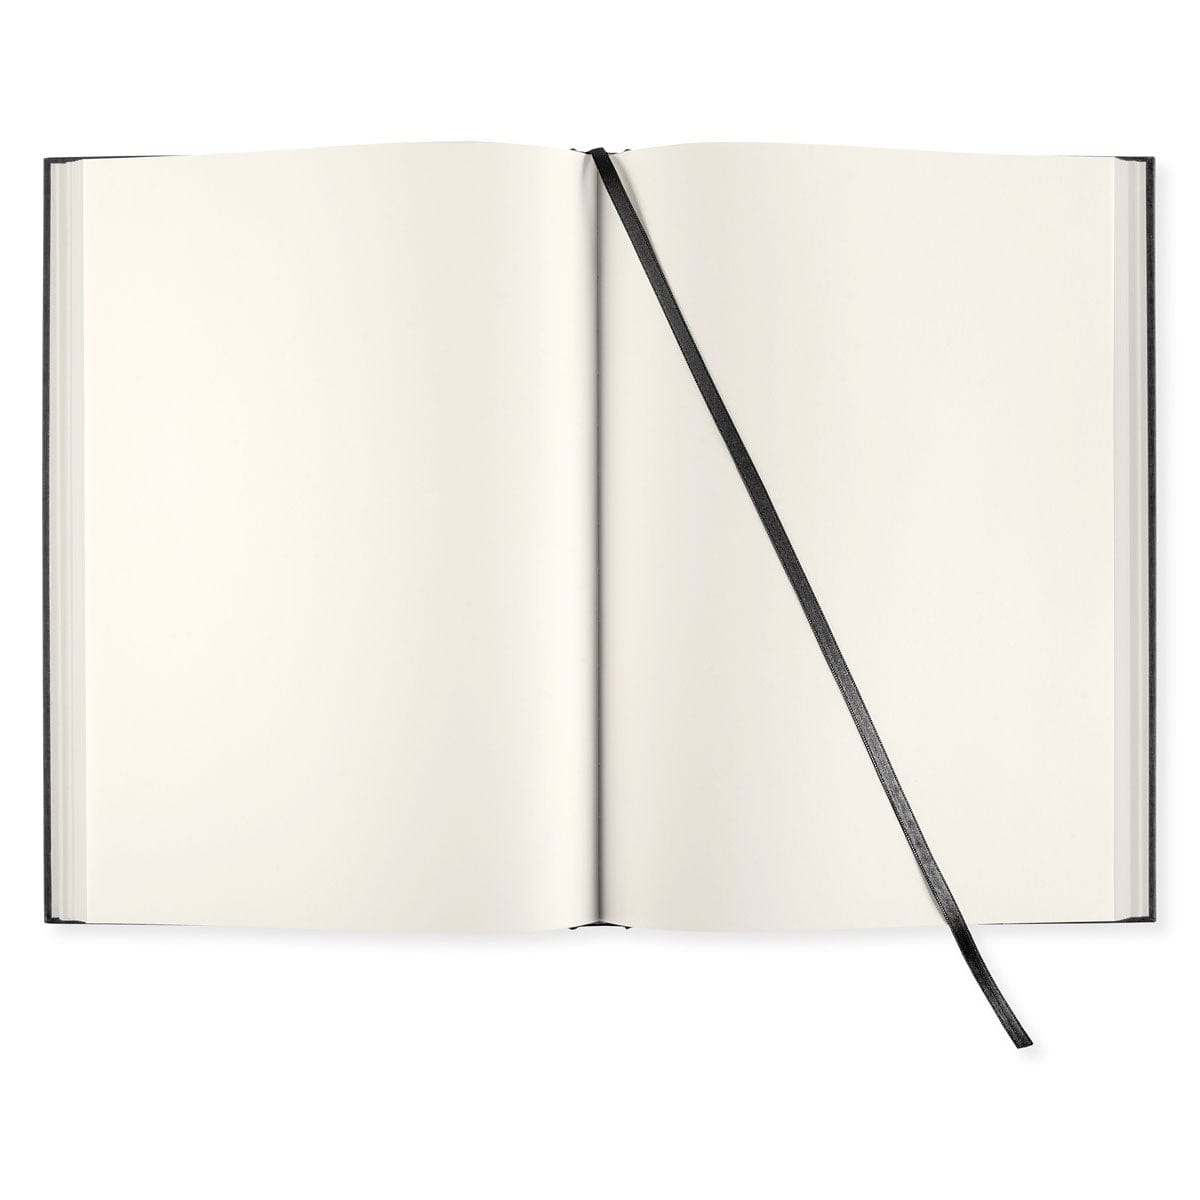 PaperStyle Paperstyle NOTEBOOK A5 256p. Plain Nature